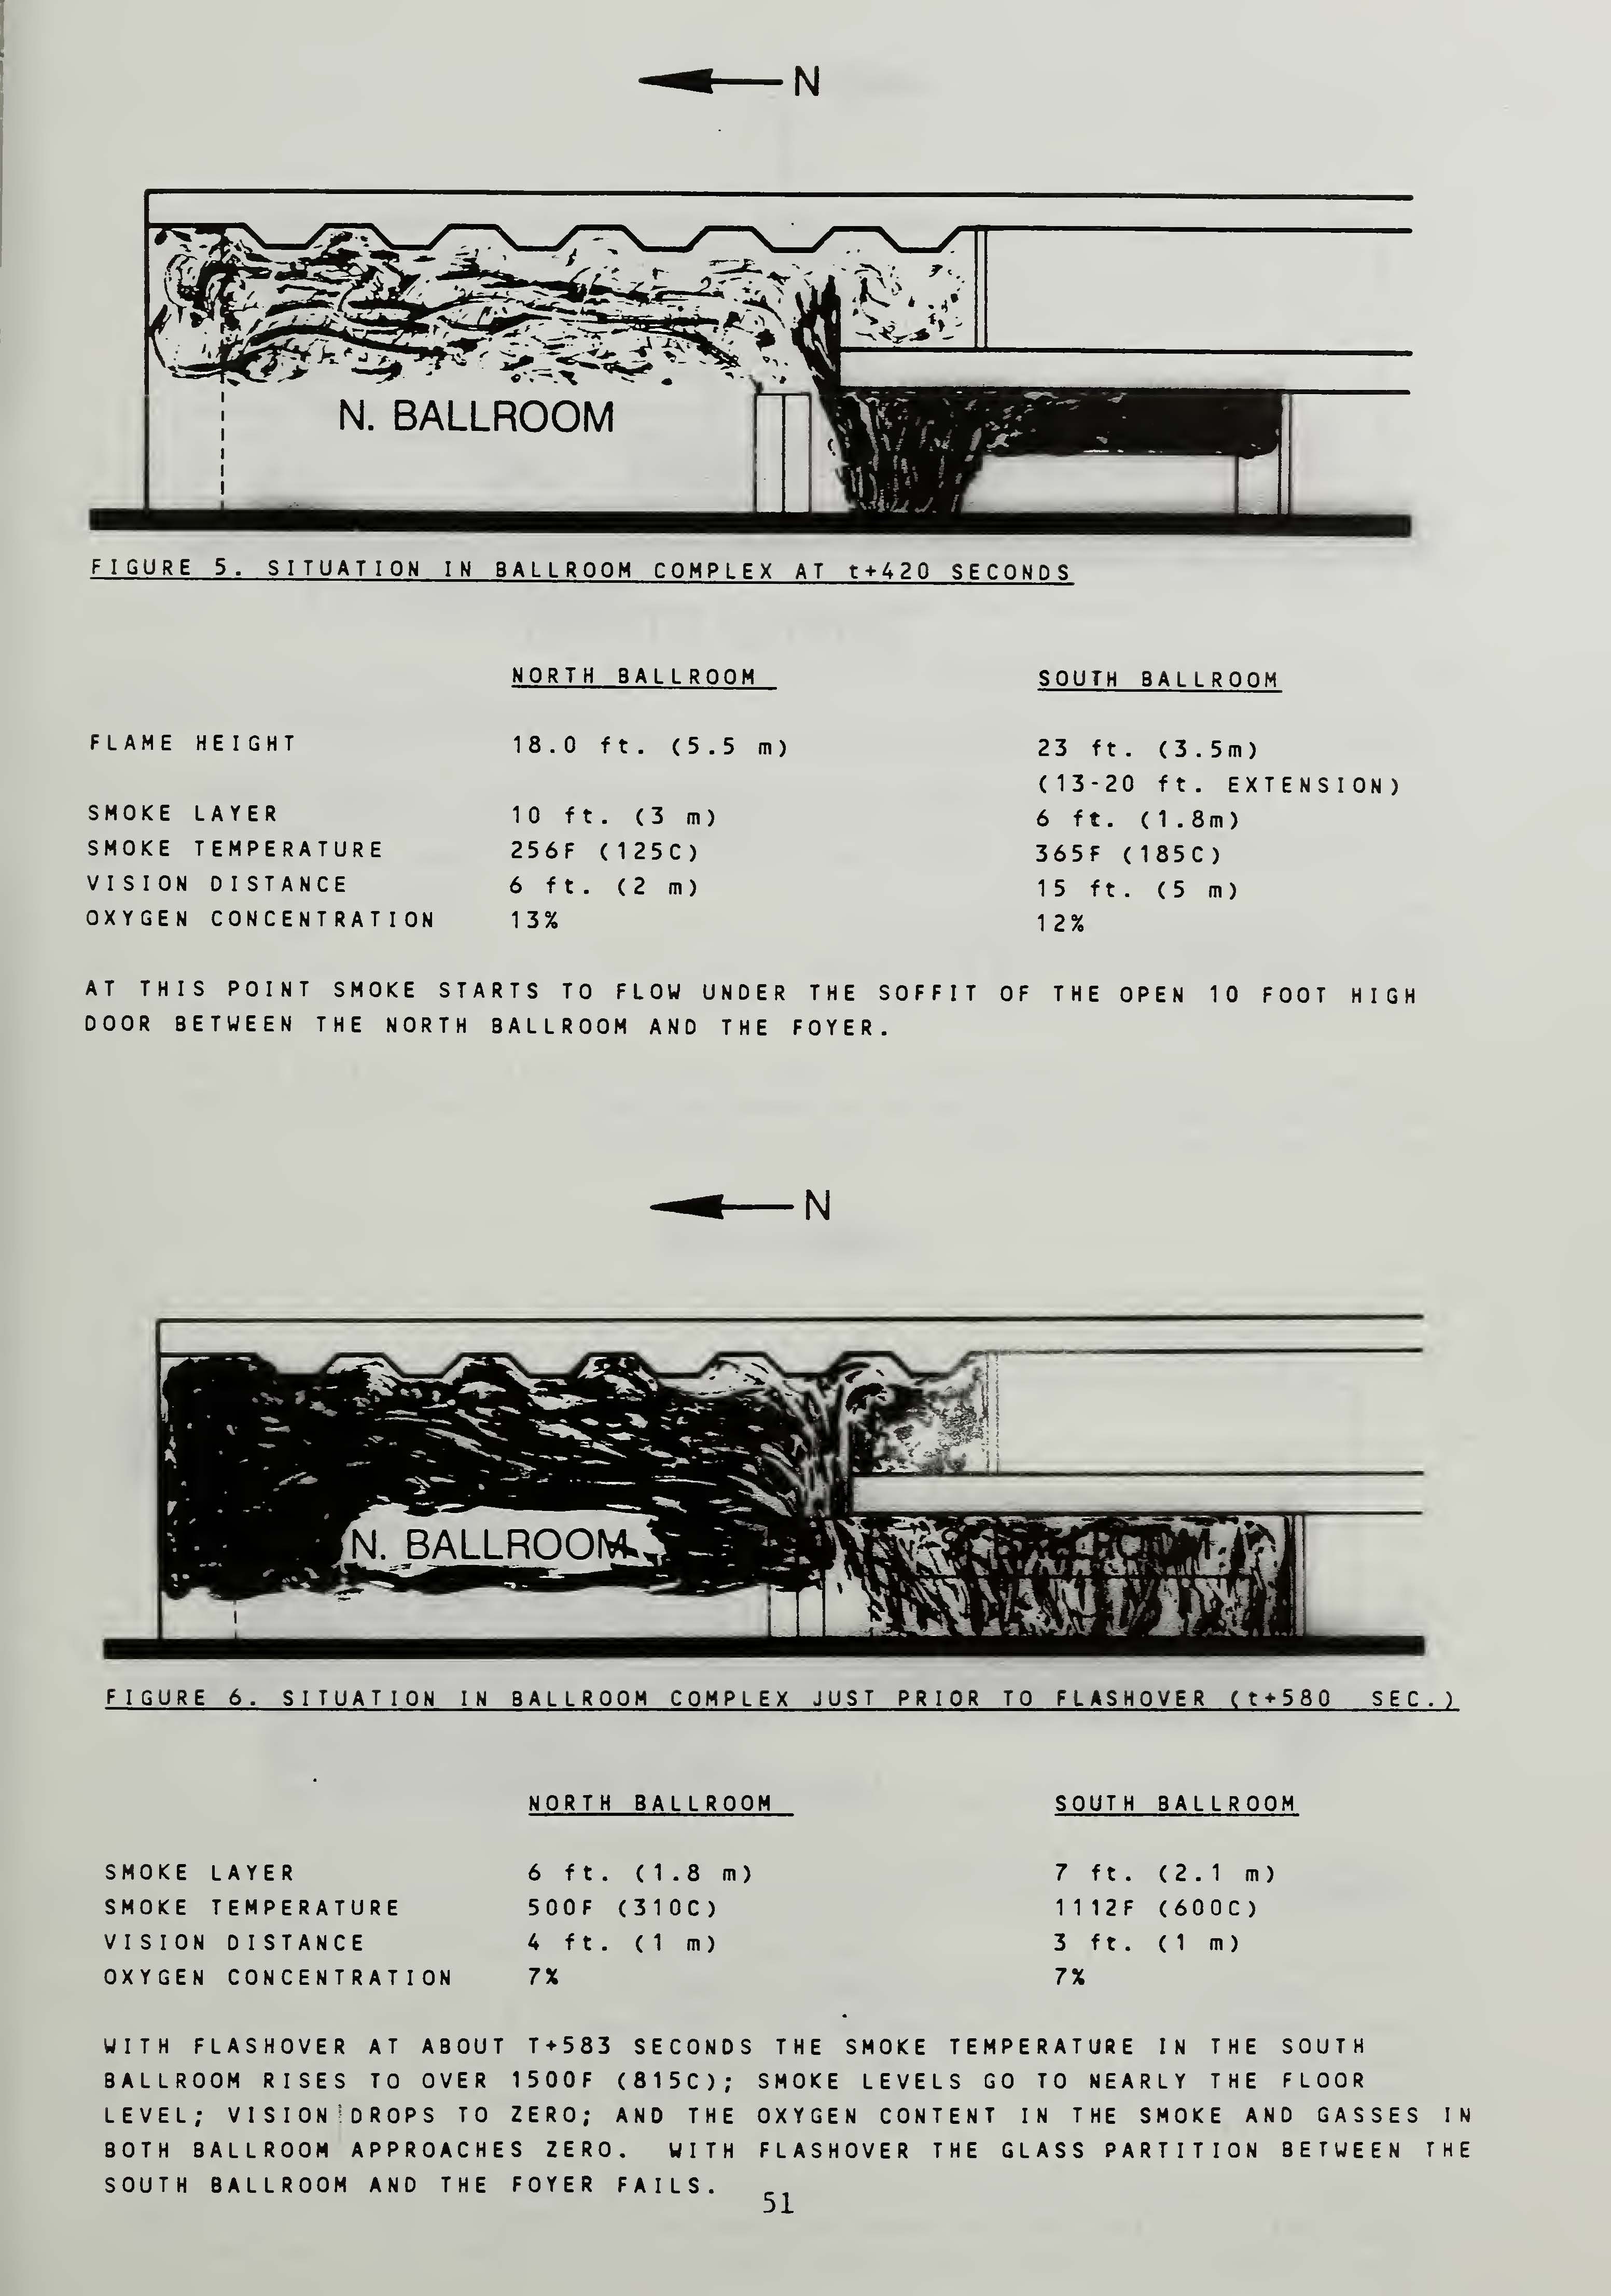 Page 61 of Harold E. Nelson, An Engineering Analysis of the Early Stages of Fire Development – The Fire at the Dupont Plaza Hotel and Casino – December 31, 1986 Gaithersburg, MD: National Institute of Standards and Technology (NIST), 1987, with hand drawn illustrations from the report showing the time-lapsed growth of the fire.  